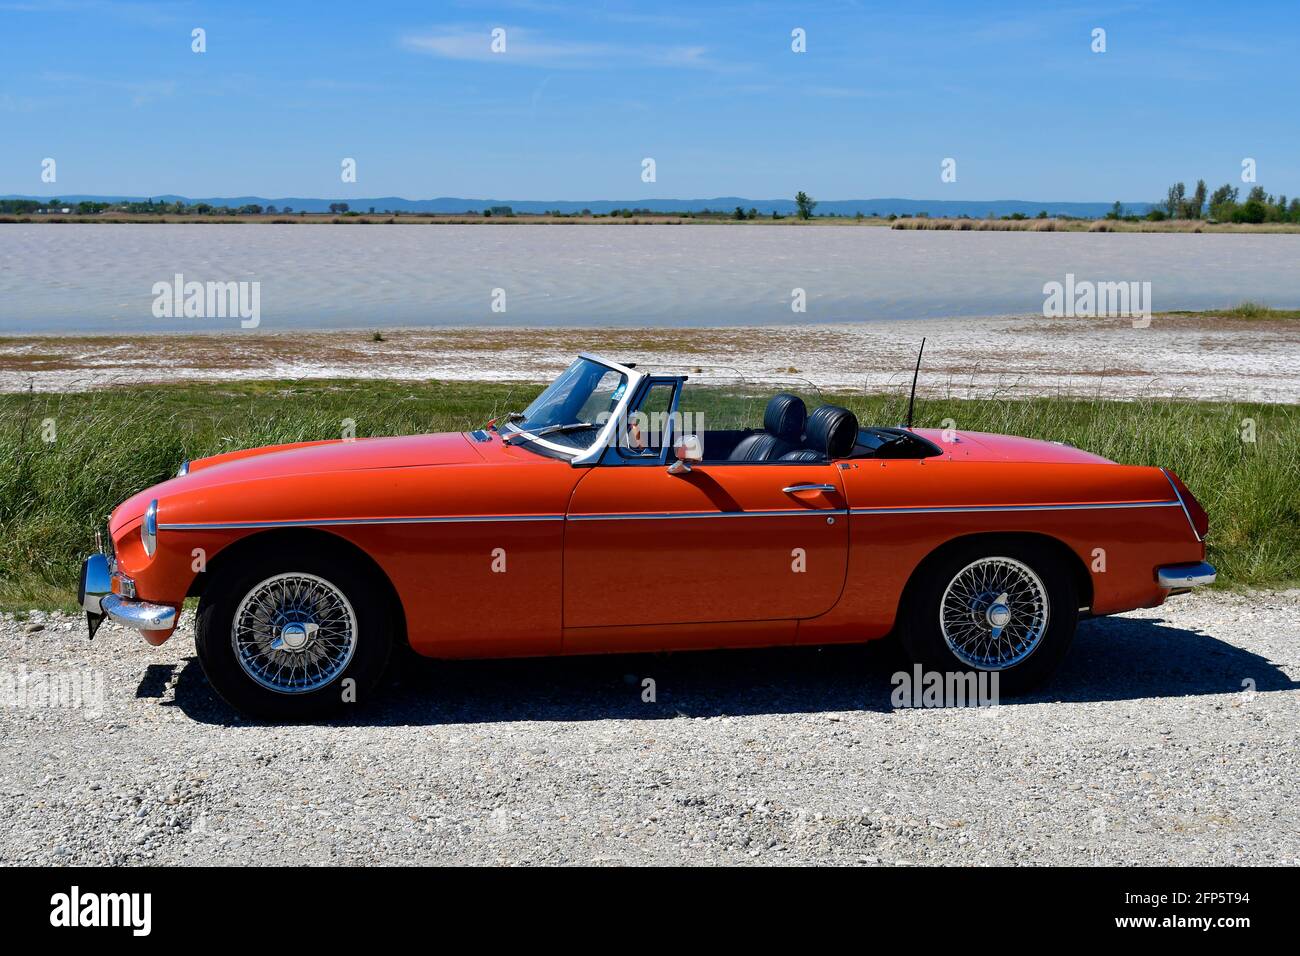 Frauenkirchen, Austria - May 09, 2021: Vintage car MGB on a lake in Neusiedler See - Seewinkel National Park Stock Photo